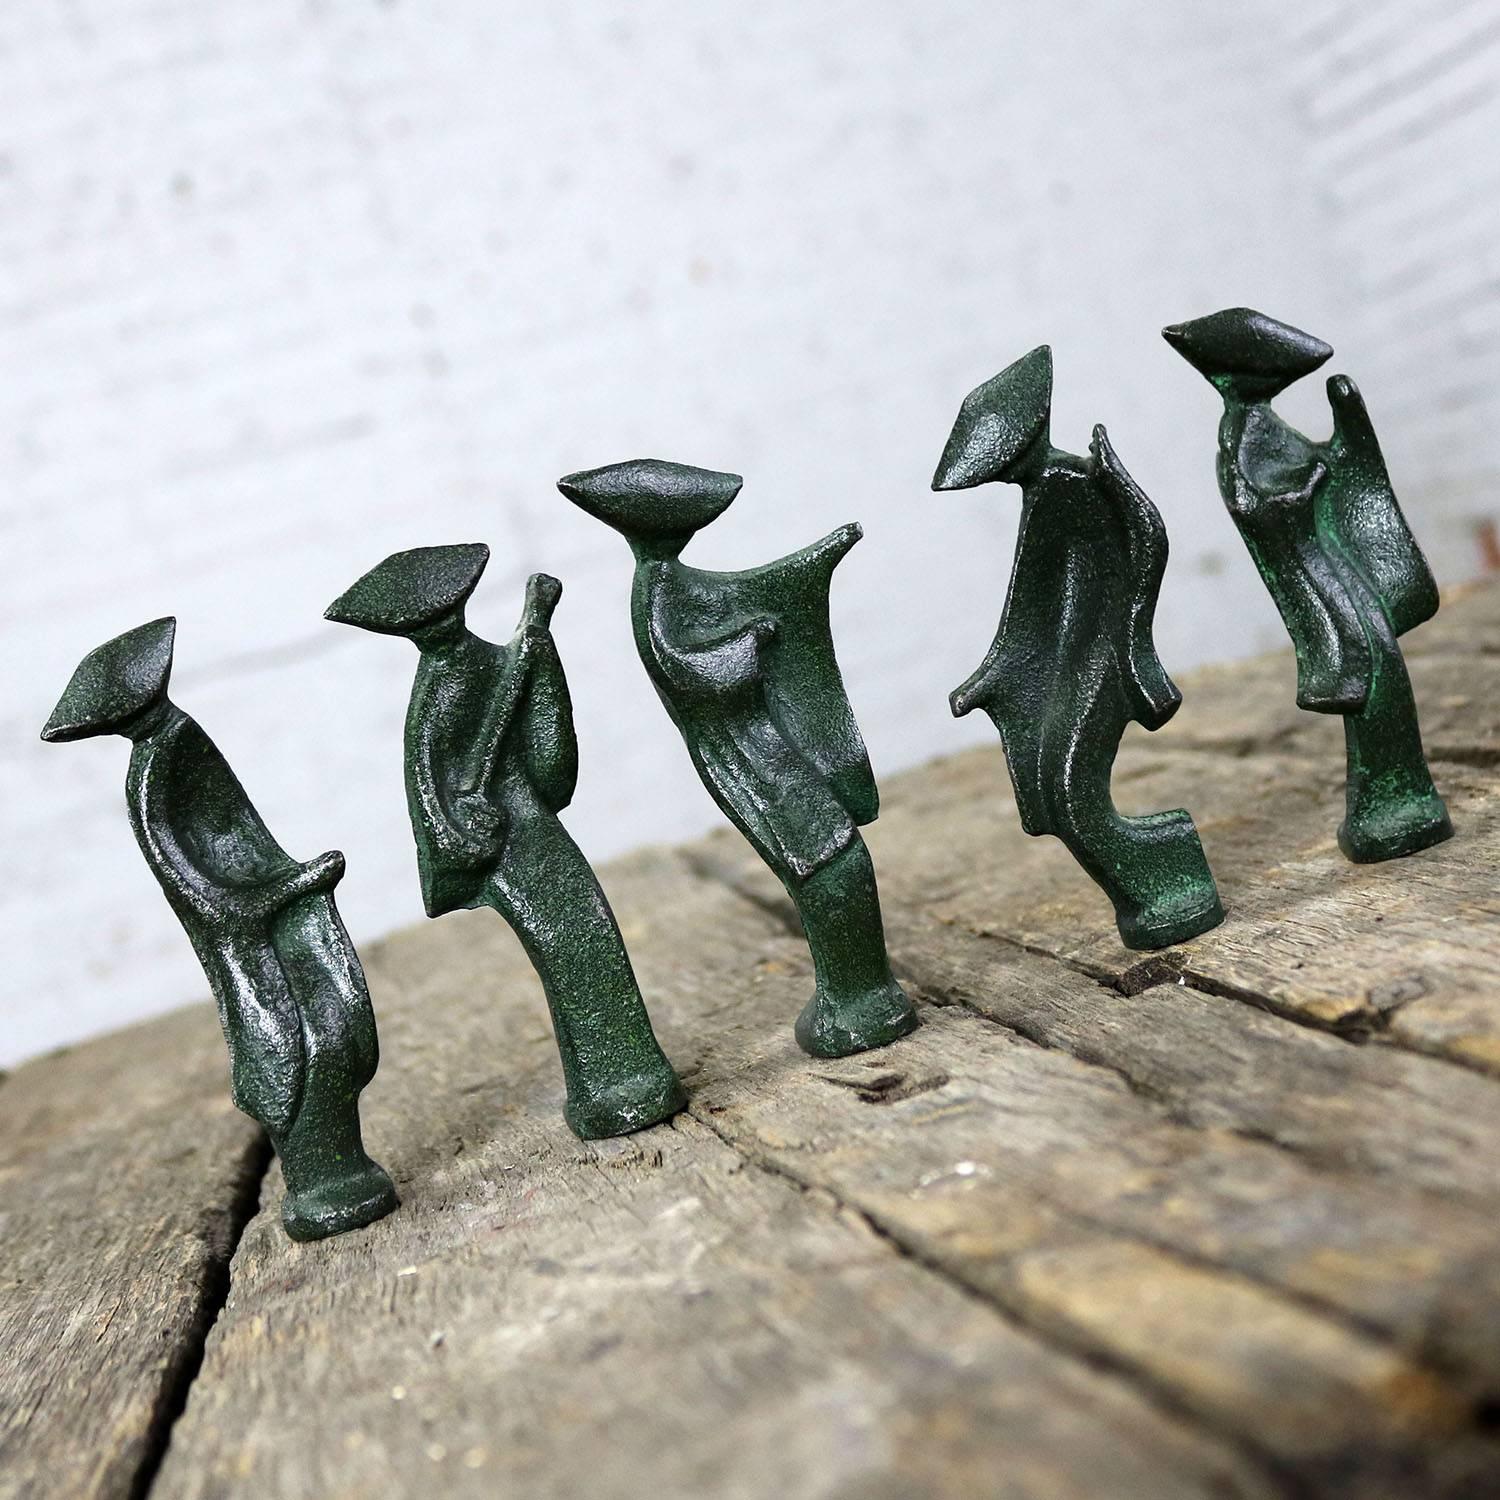 Fun and interesting set of five Geisha figures cast iron with a green patinated finish. These four-inch-high Japanese figurines are in fabulous vintage condition circa 1930s-1970s.

This little set of five dancing and instrument playing Geisha